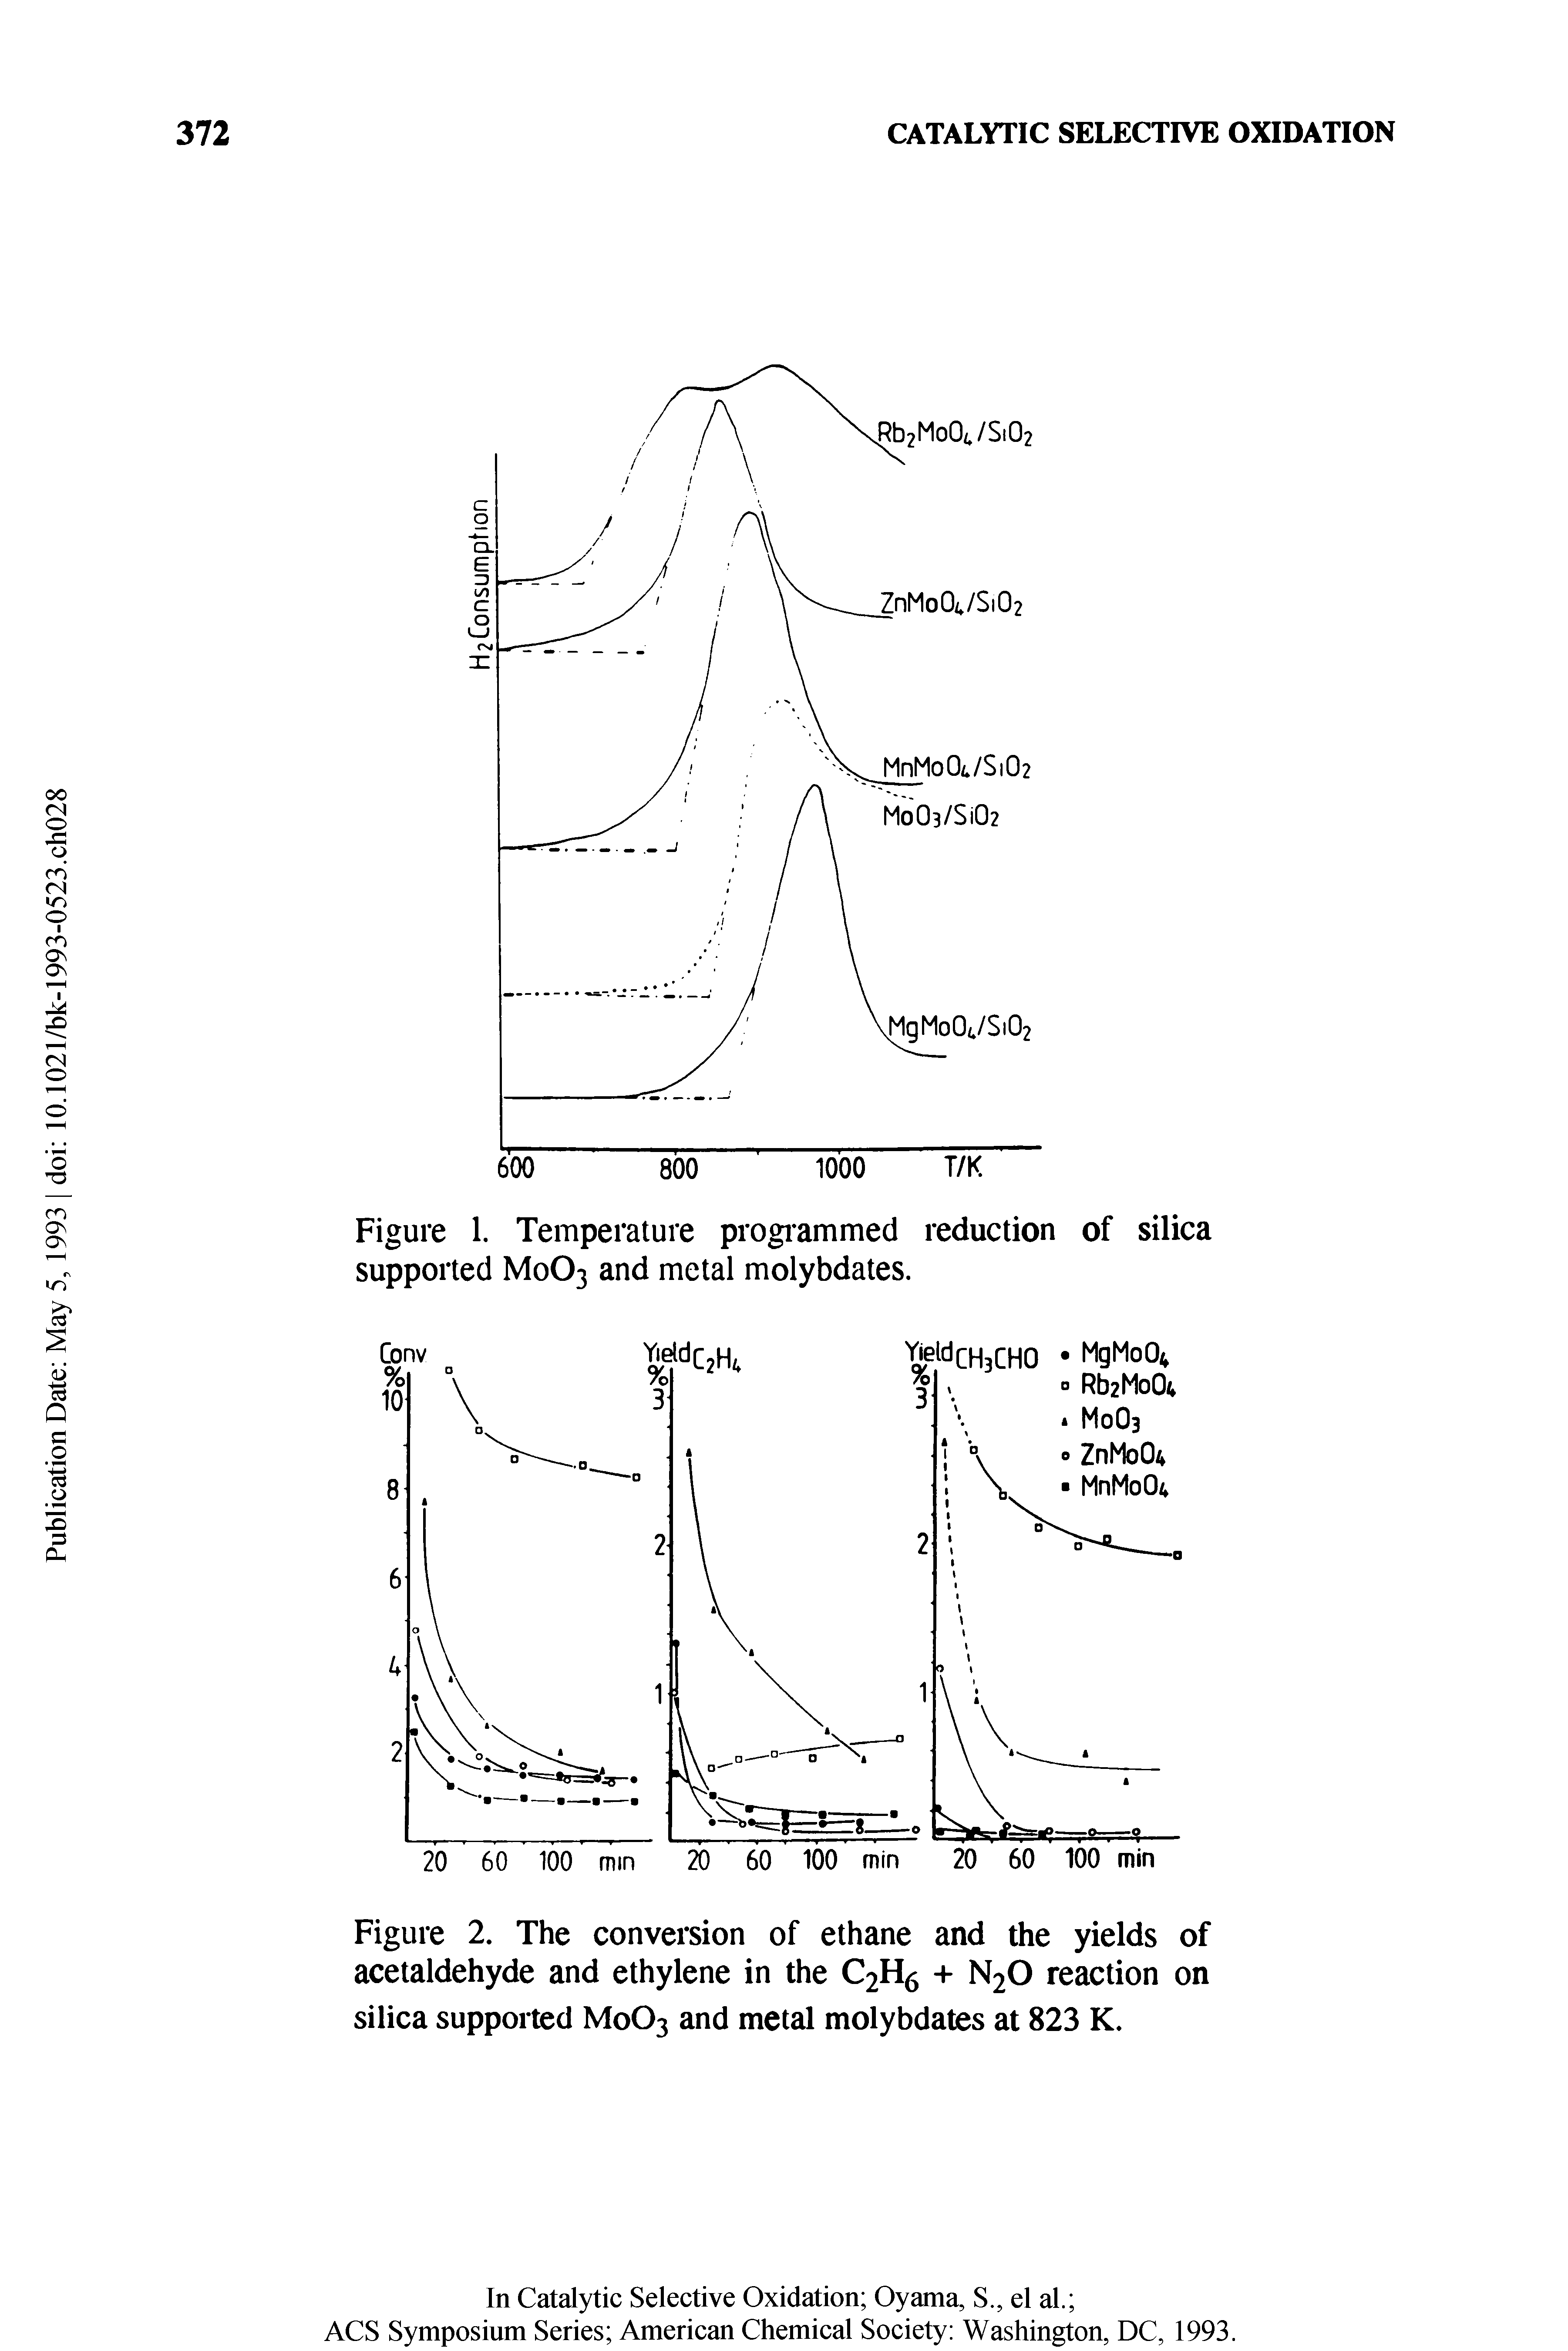 Figure 2. The conversion of ethane and the yields of acetaldehyde and ethylene in the C2H6 + N2O reaction on silica supported M0O3 and metal molybdates at 823 K.